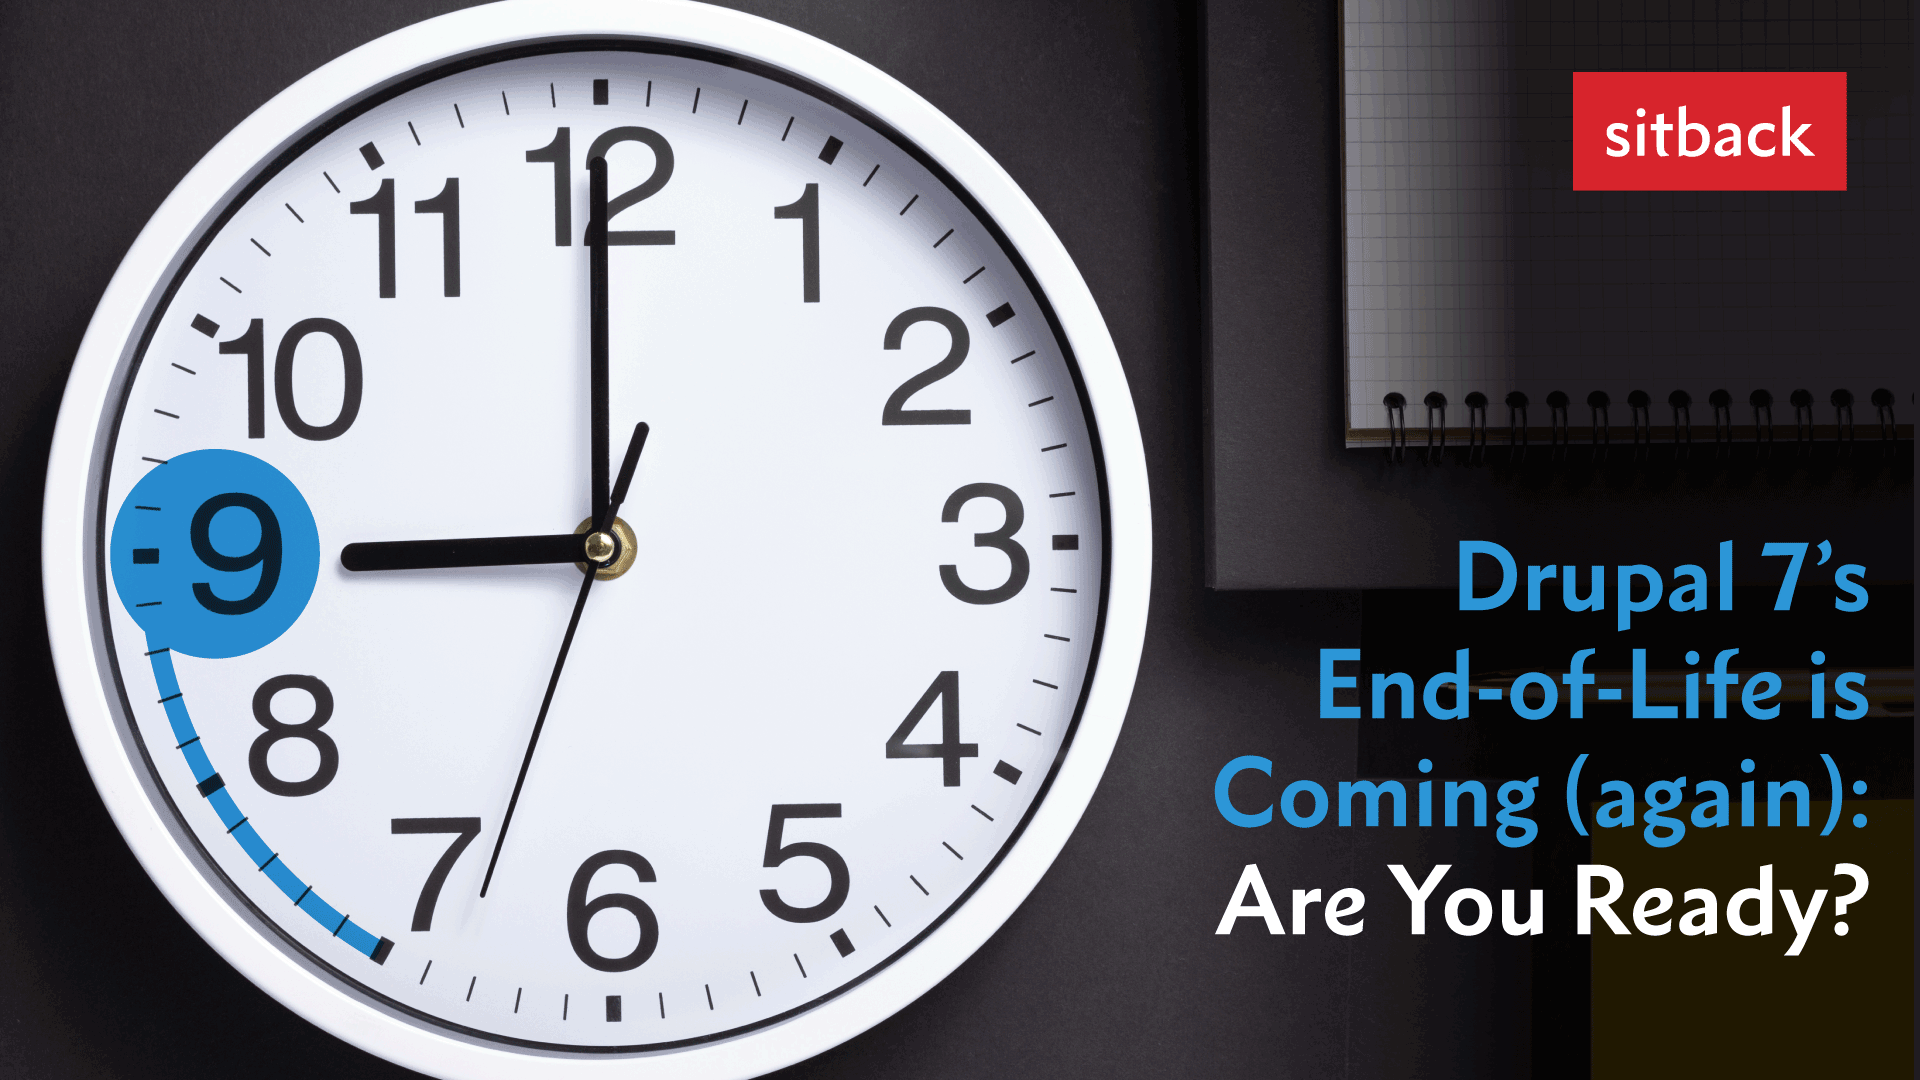 Drupal 7’s End-of-Life is Coming: Are You Ready?